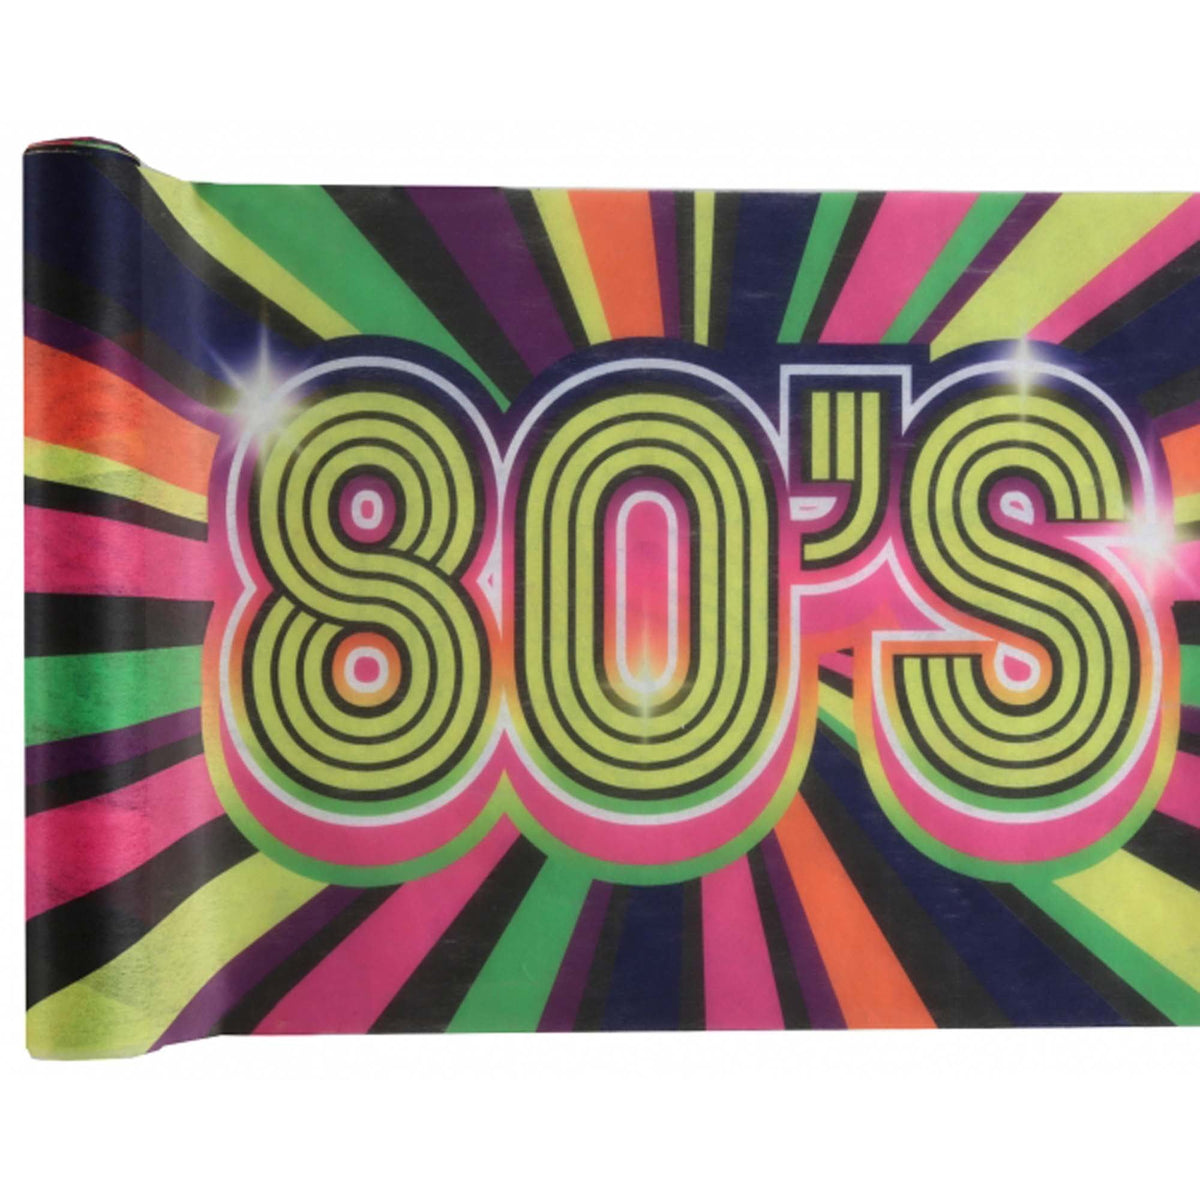 SANTEX Theme Party 80's Table Runner, Multicolor, 5 Meters, 1 Count